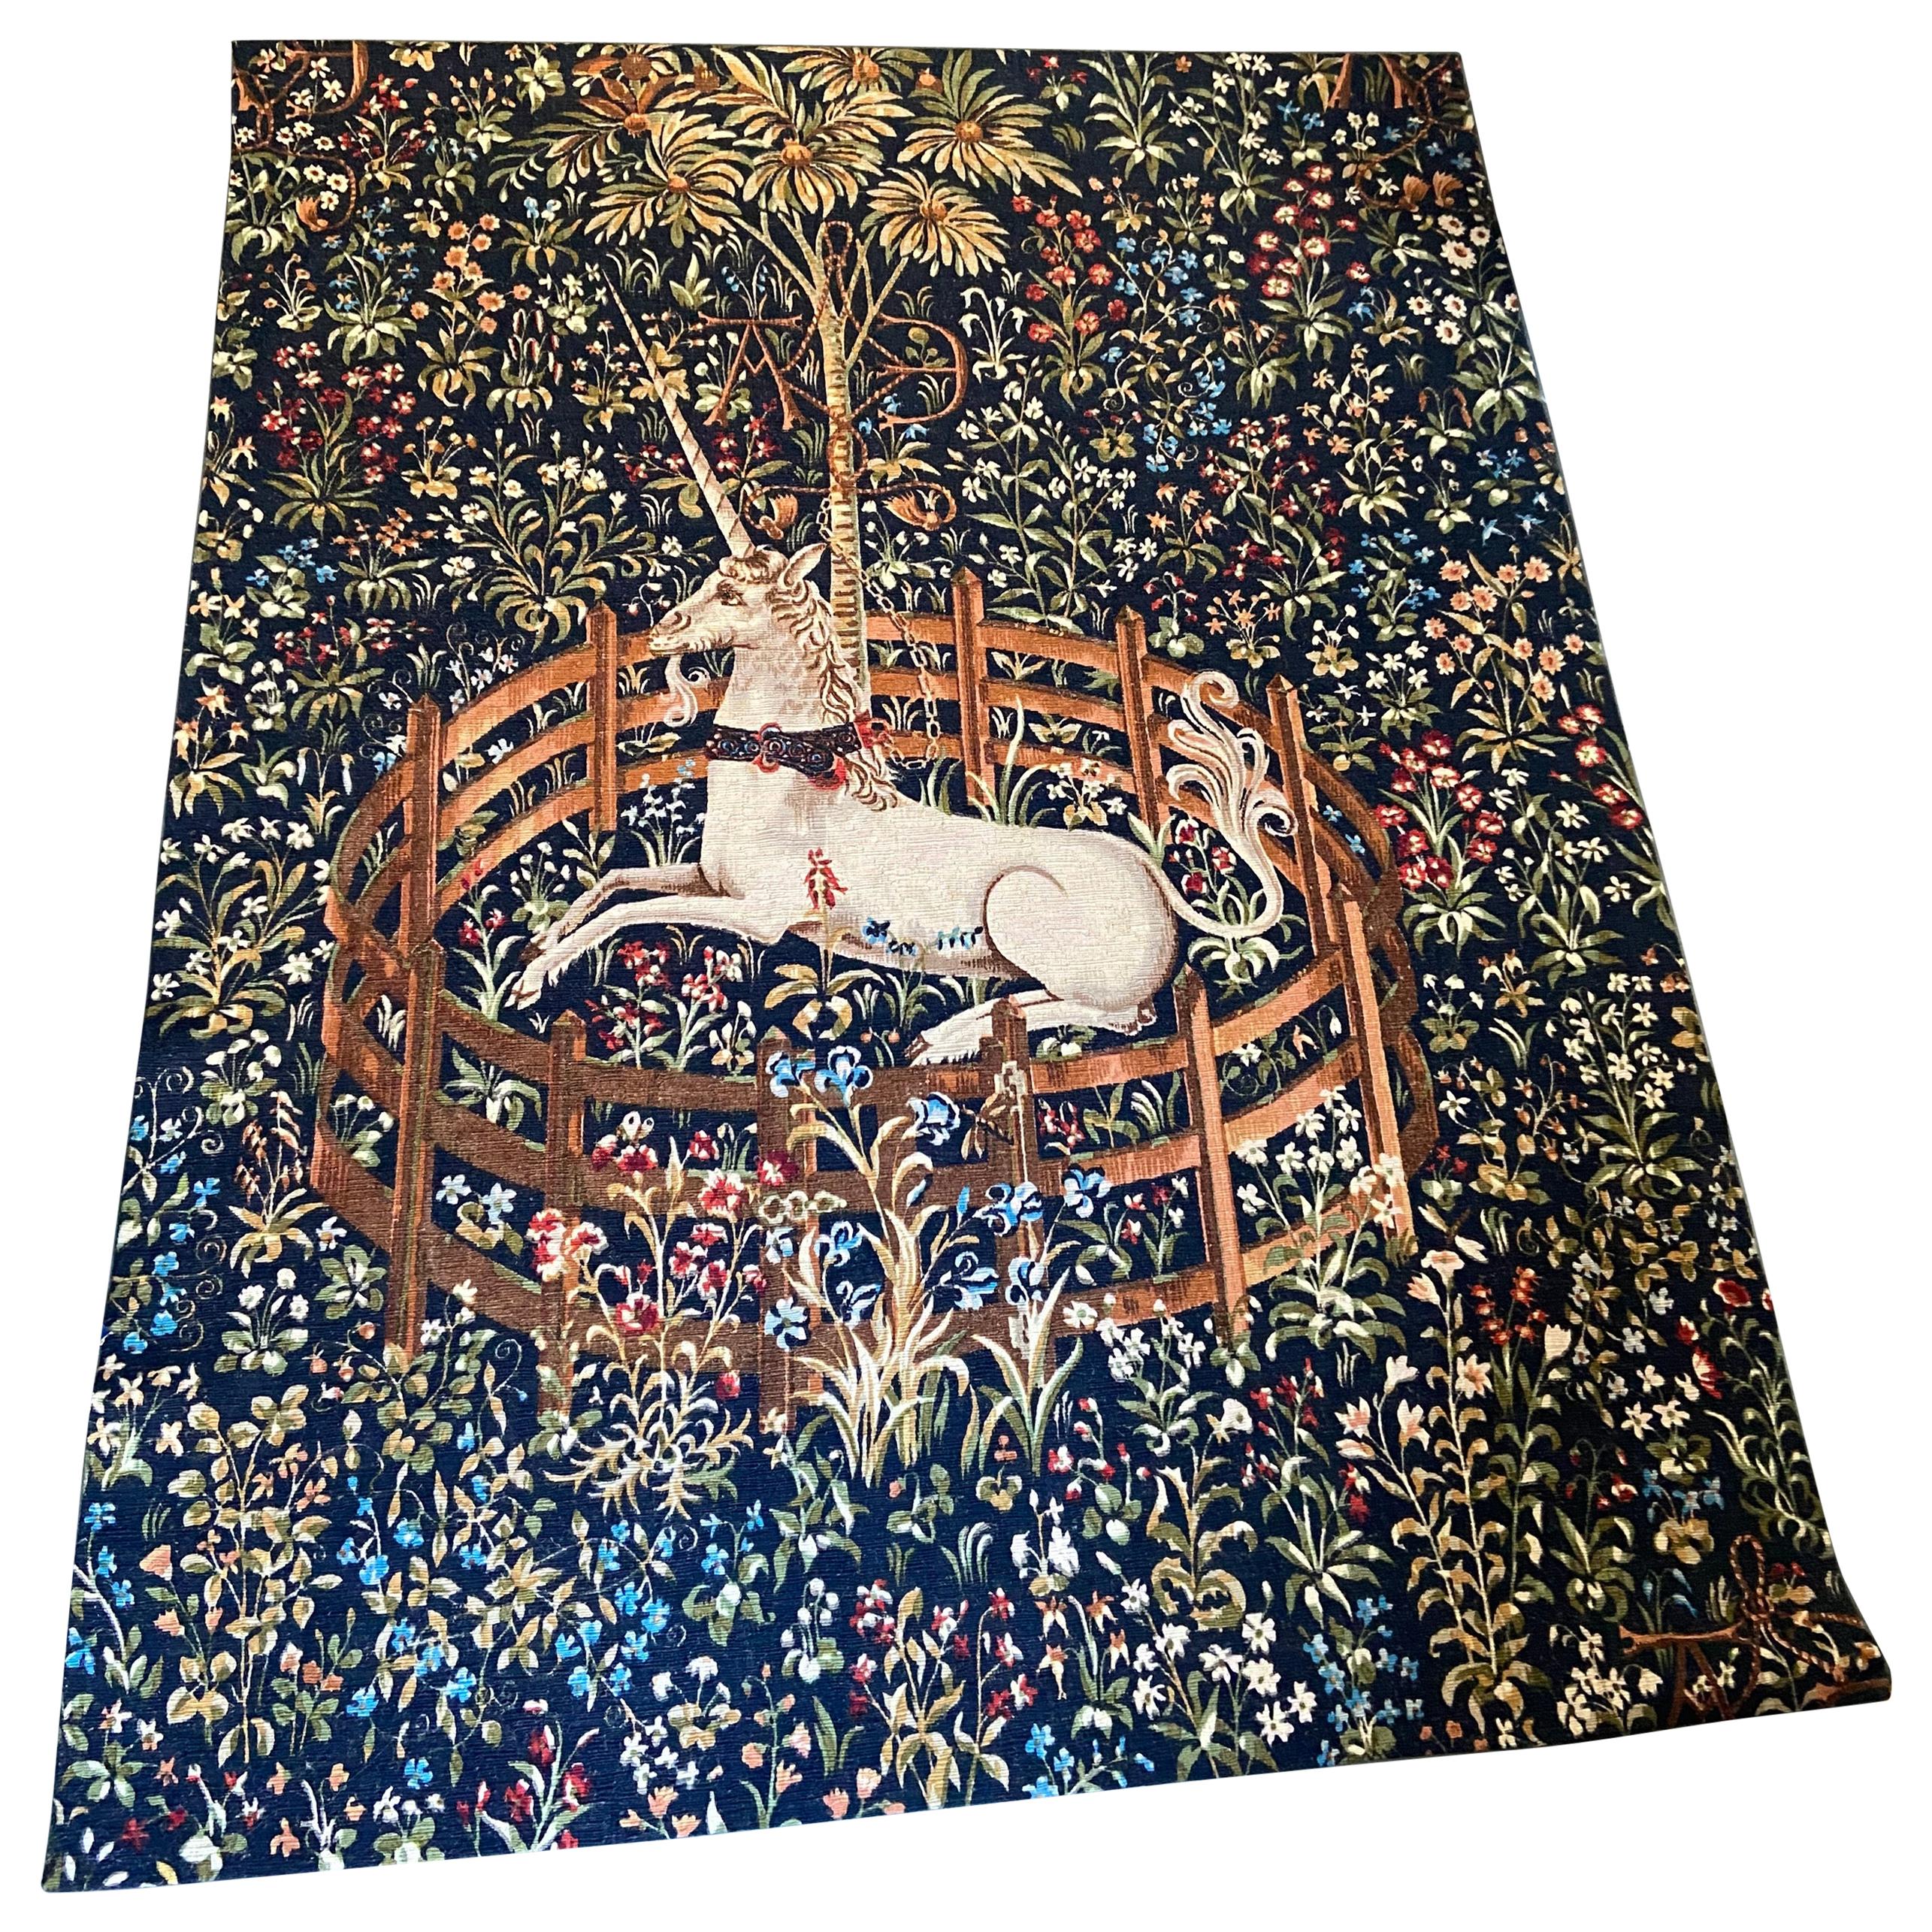 20th Century Large French Handmade Tapestry Based on "The Lady and the Unicorn"